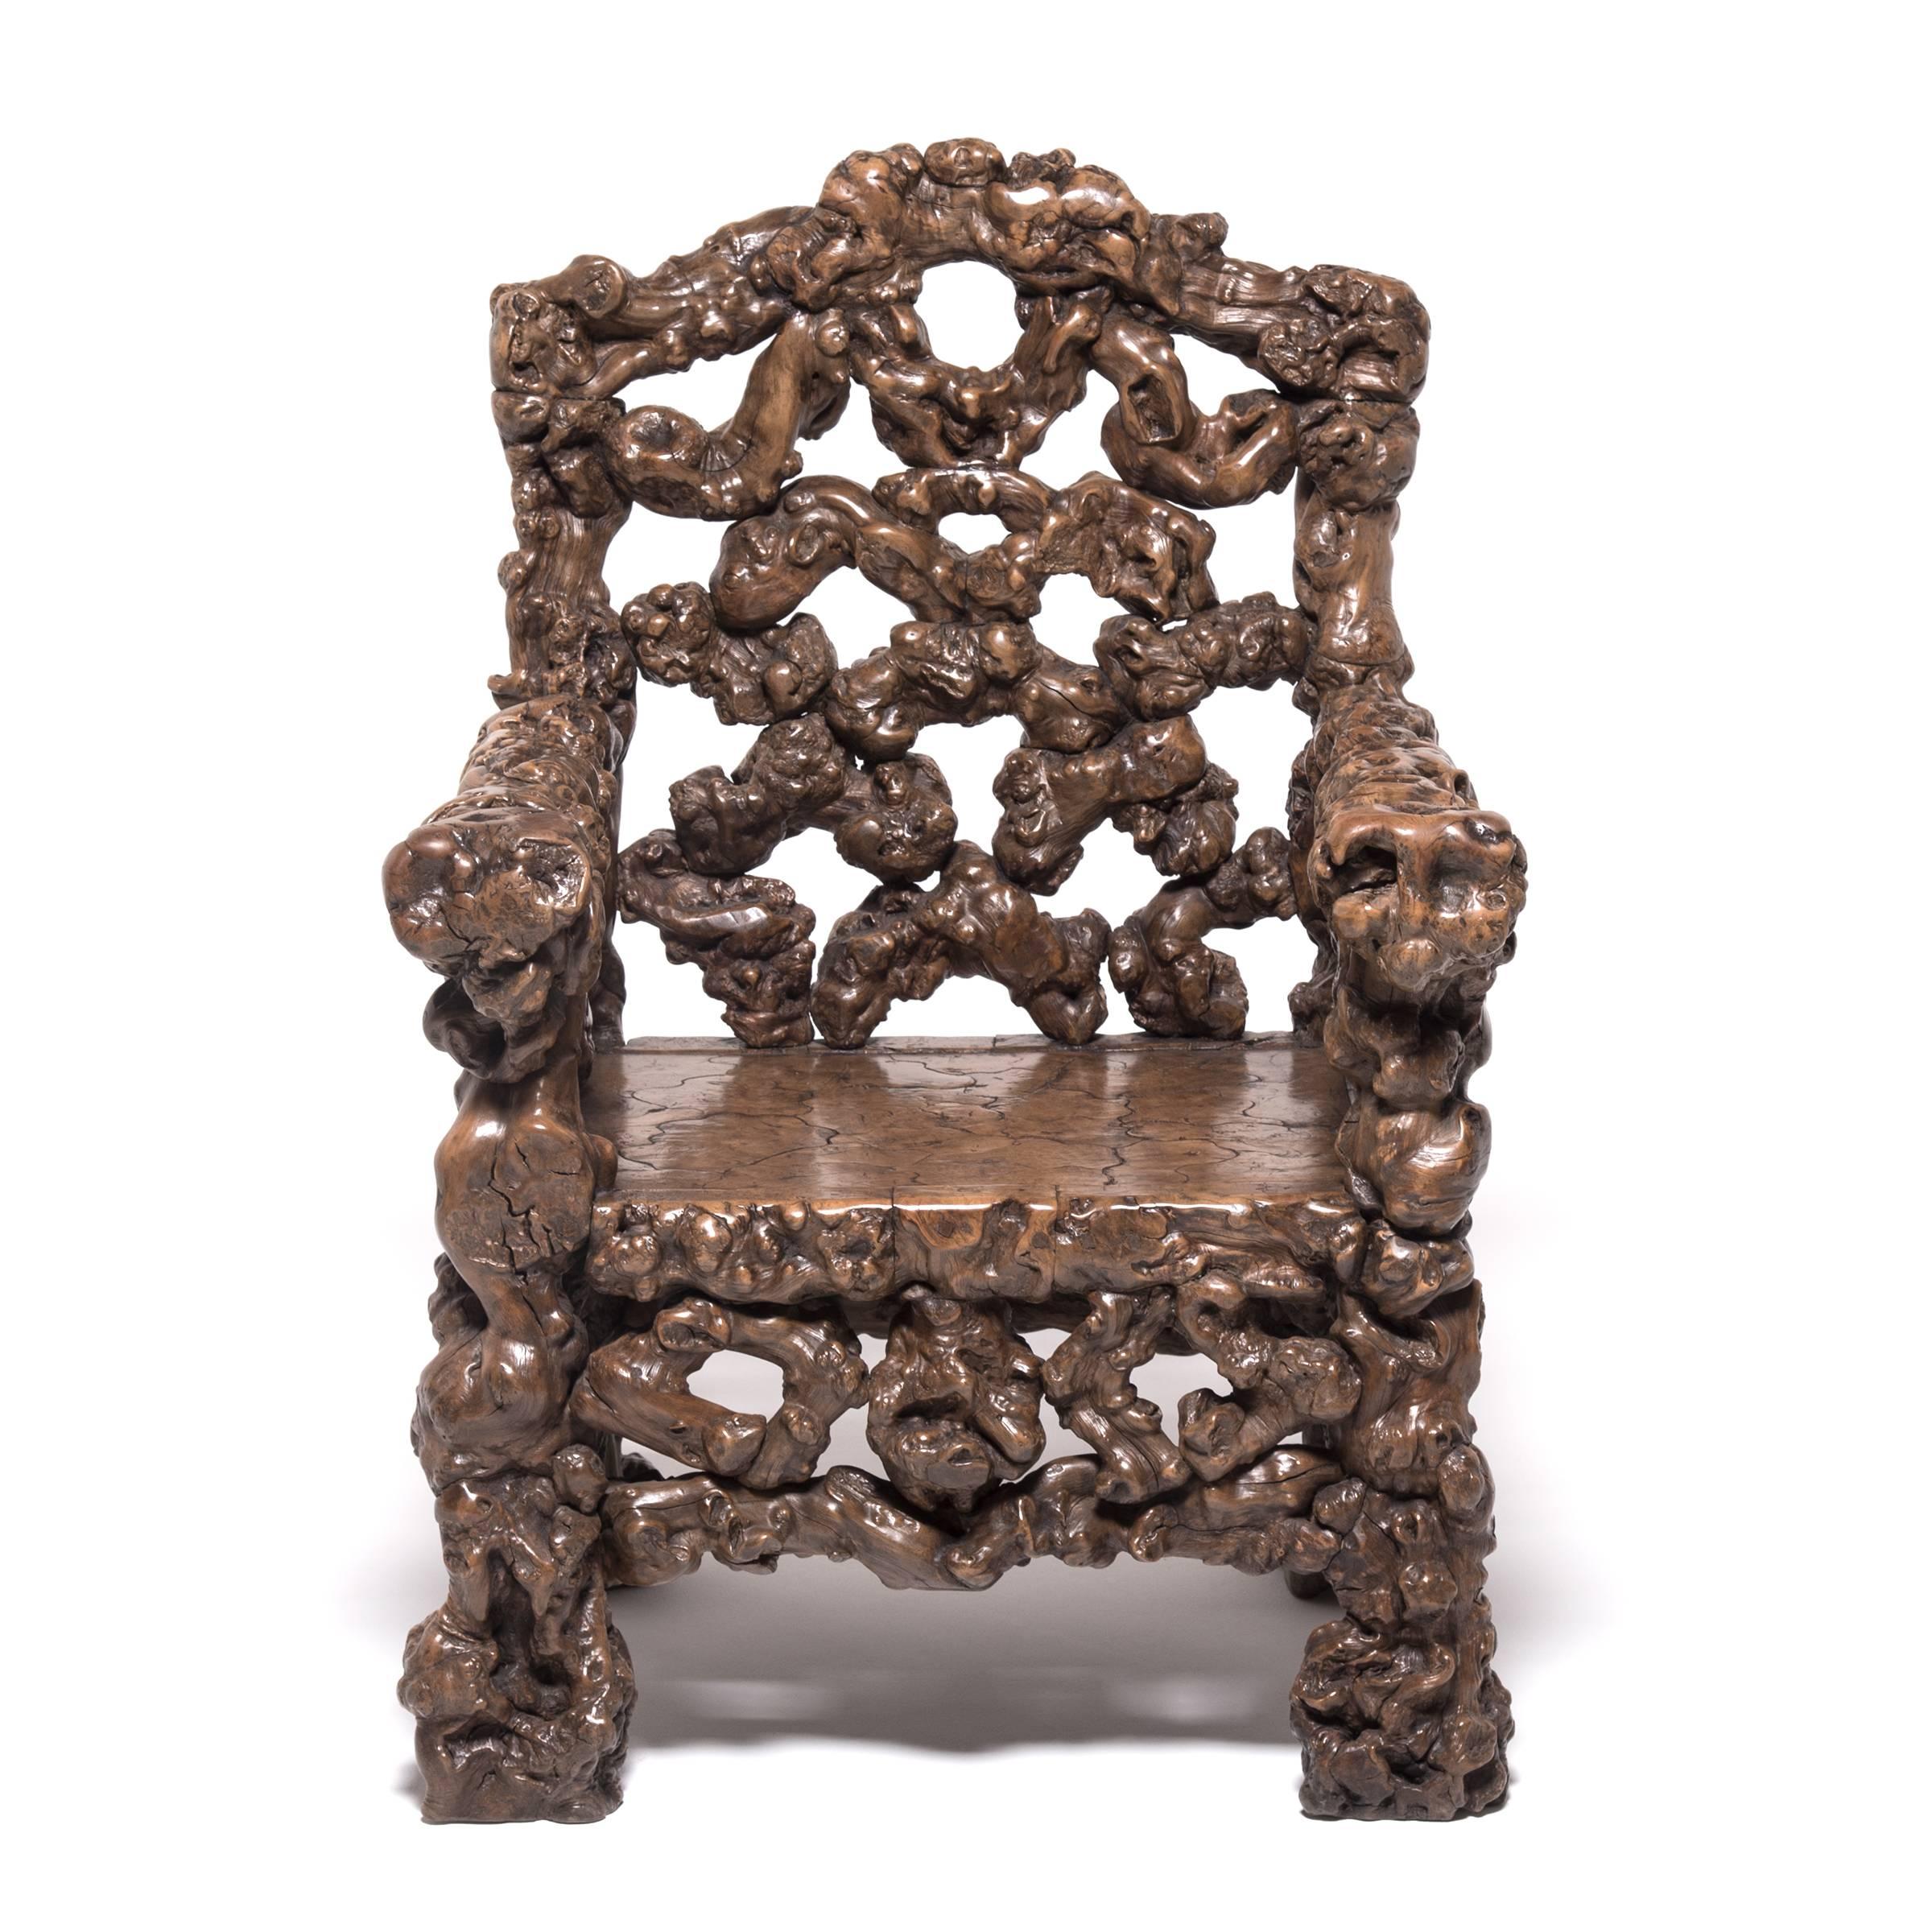 Rootwood furniture carried enough prestige and symbolic meaning that Chinese emperor Minghuang (c. 970) was painted for his portrait while sitting in a root chair. Naturally knotted and untamed, rootwood furniture reflected a cultivated taste for